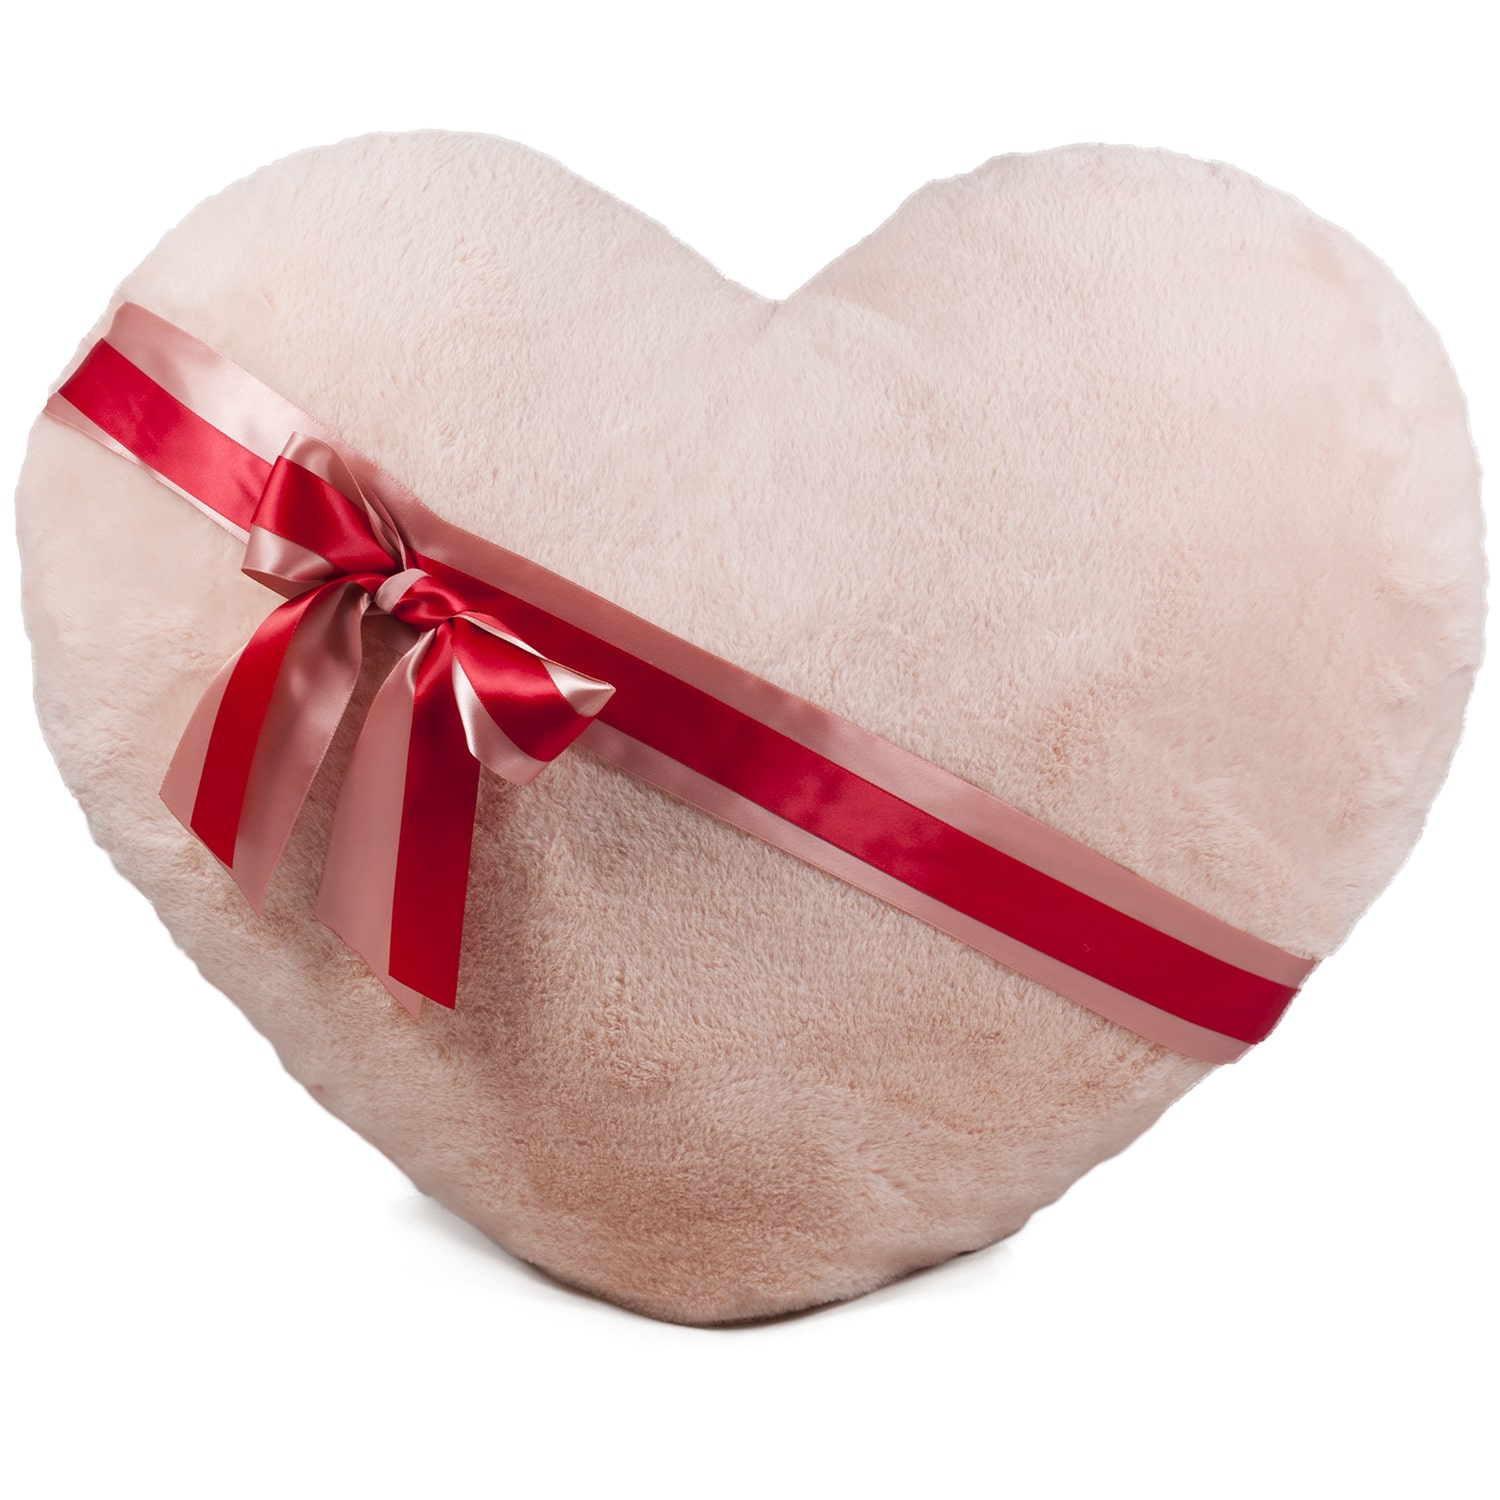 Plush heart with ribbon and sound